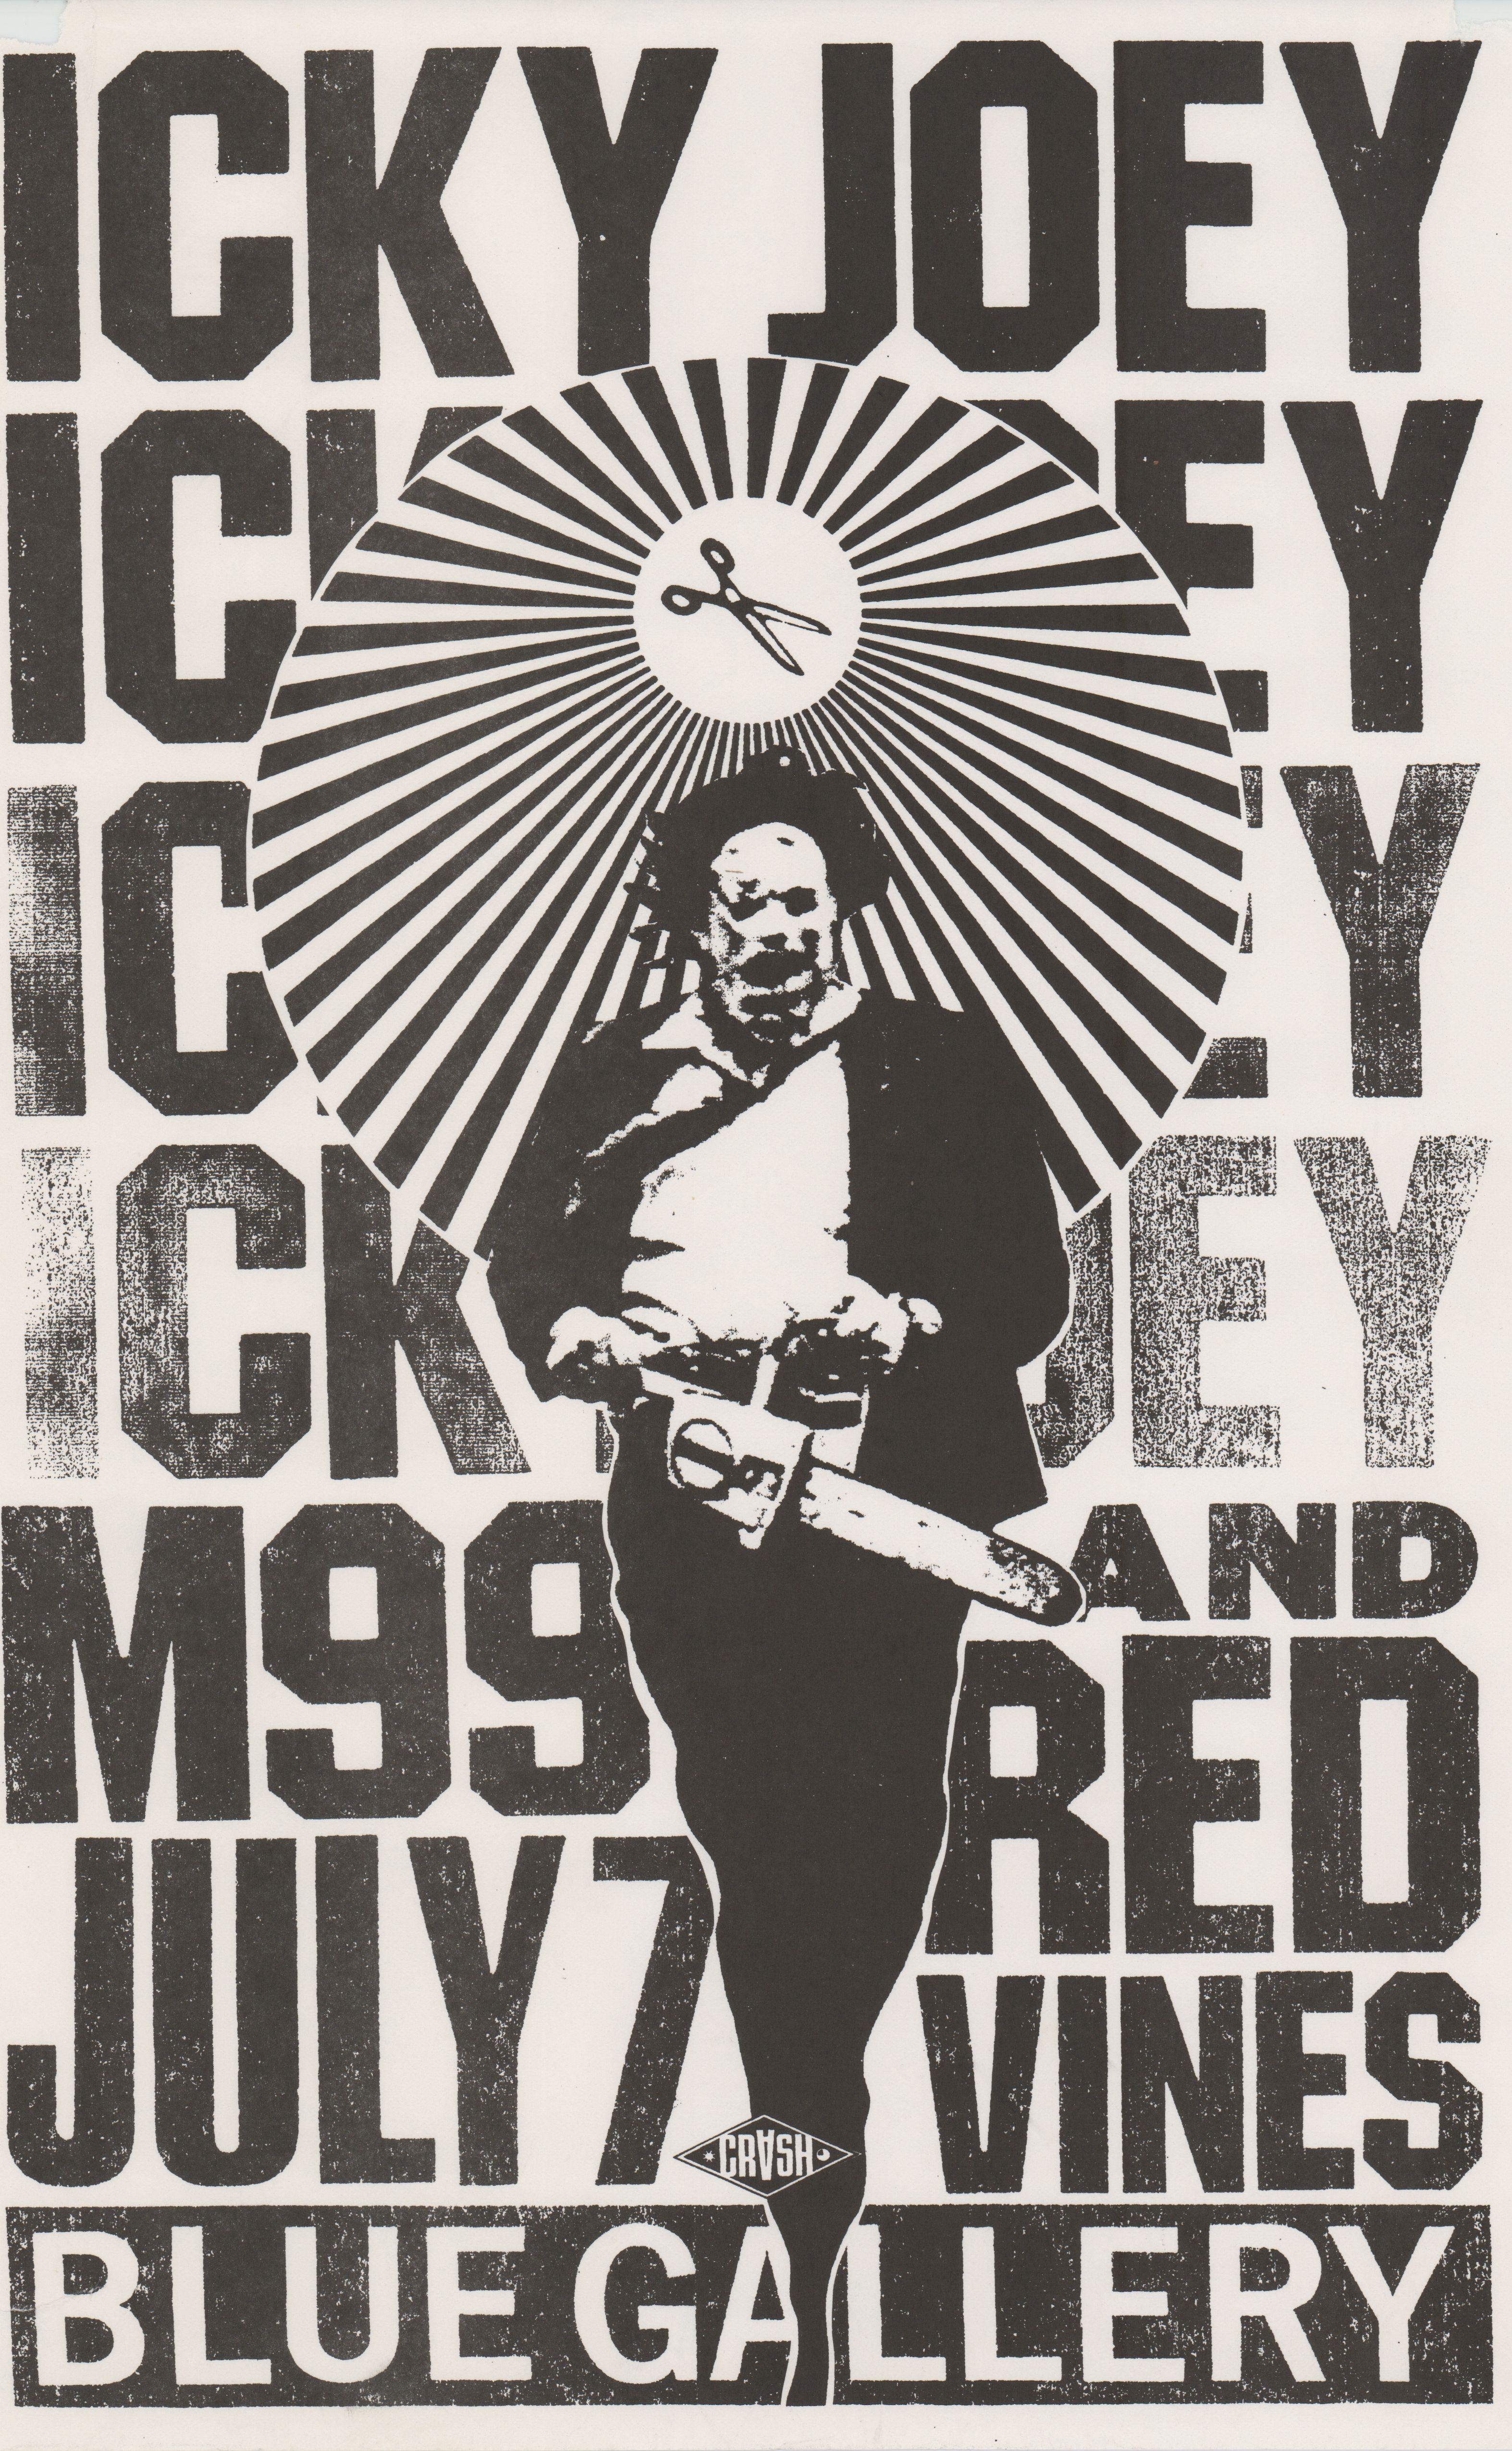 MXP-145.4 Icky Joey 1990 Blue Gallery  Jul 7 Concert Poster